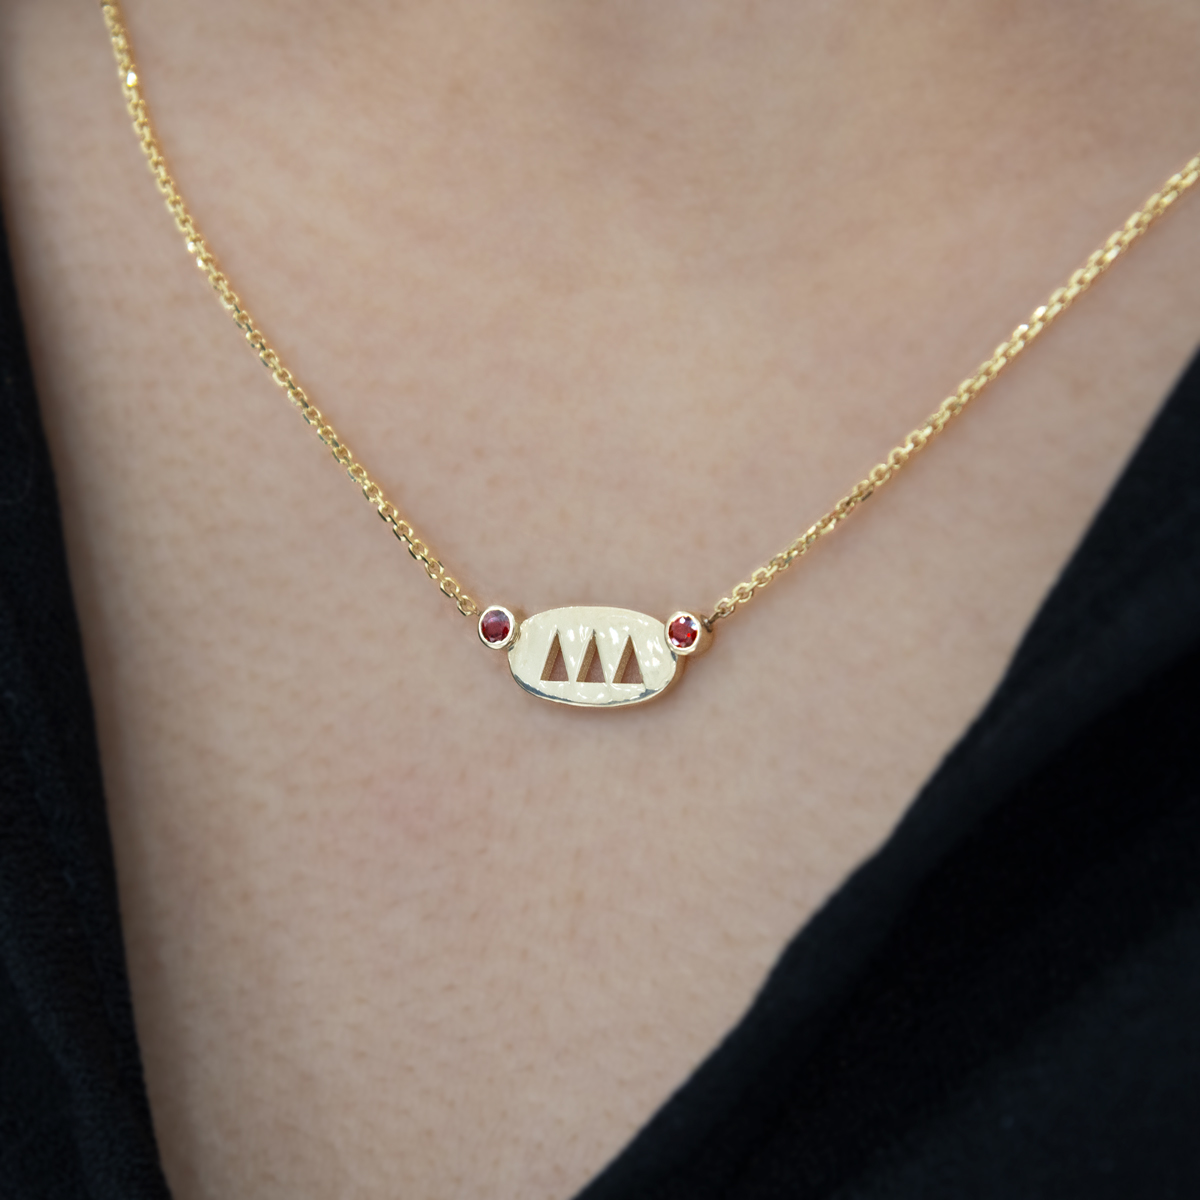 Dino Lonzano Sorority Oval Necklace with Rubies, 14k Gold